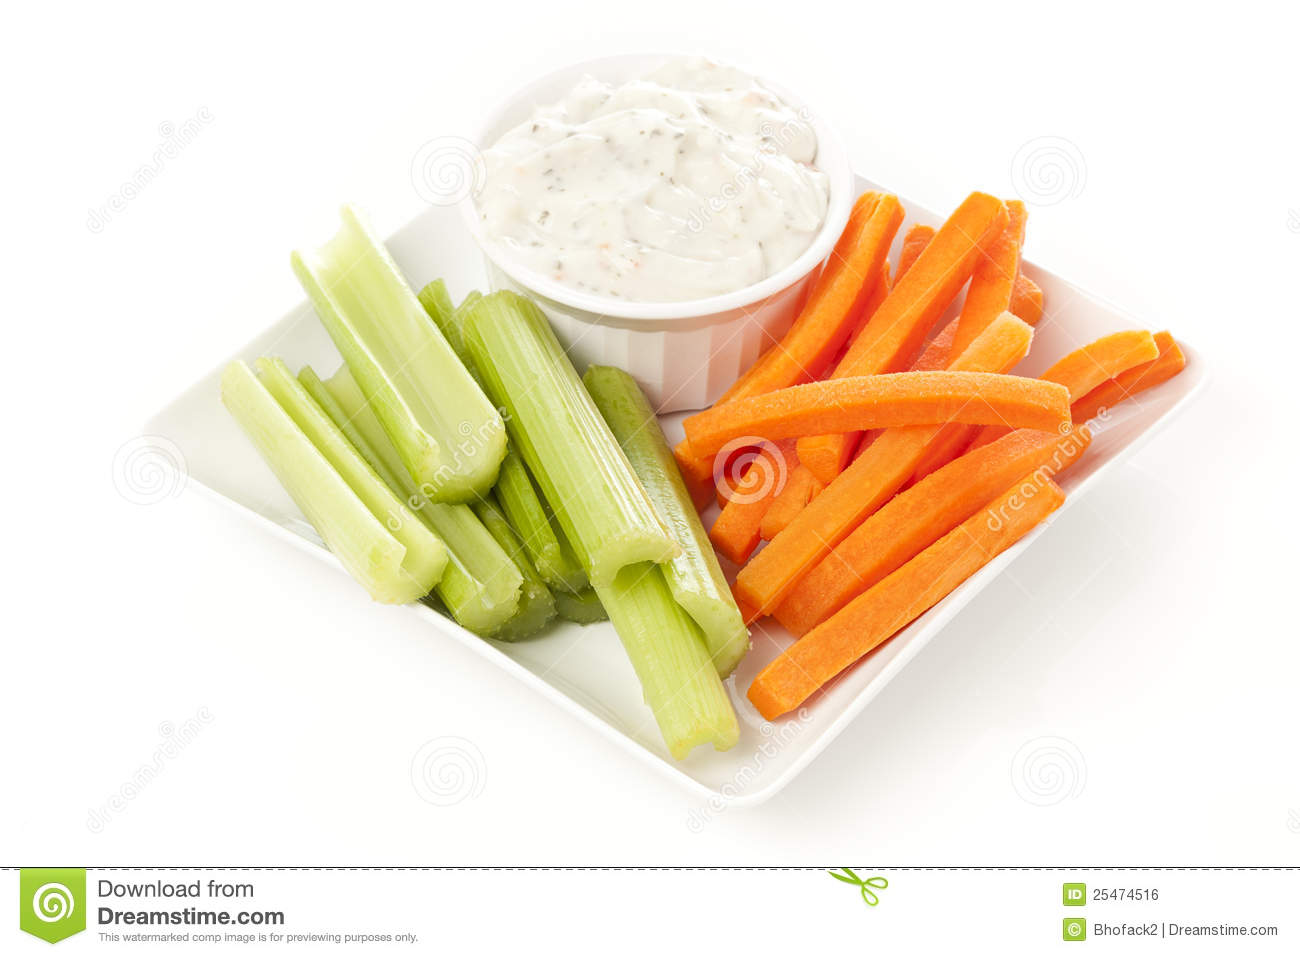 Ranch Dressing With Carrots And Celery Royalty Free Stock Image